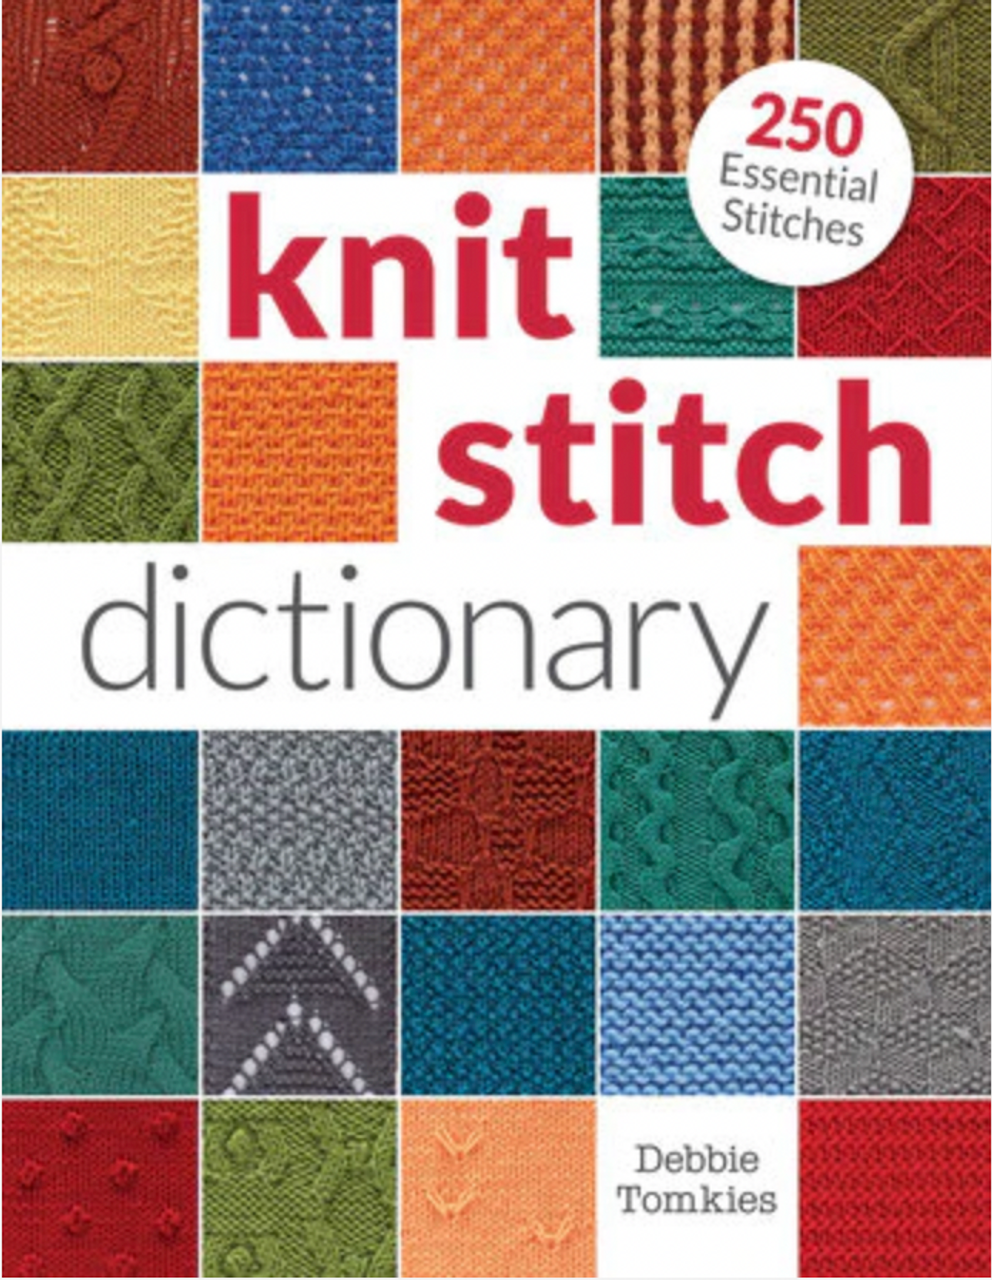 Knit Stitch Dictionary - Around the Table Yarns